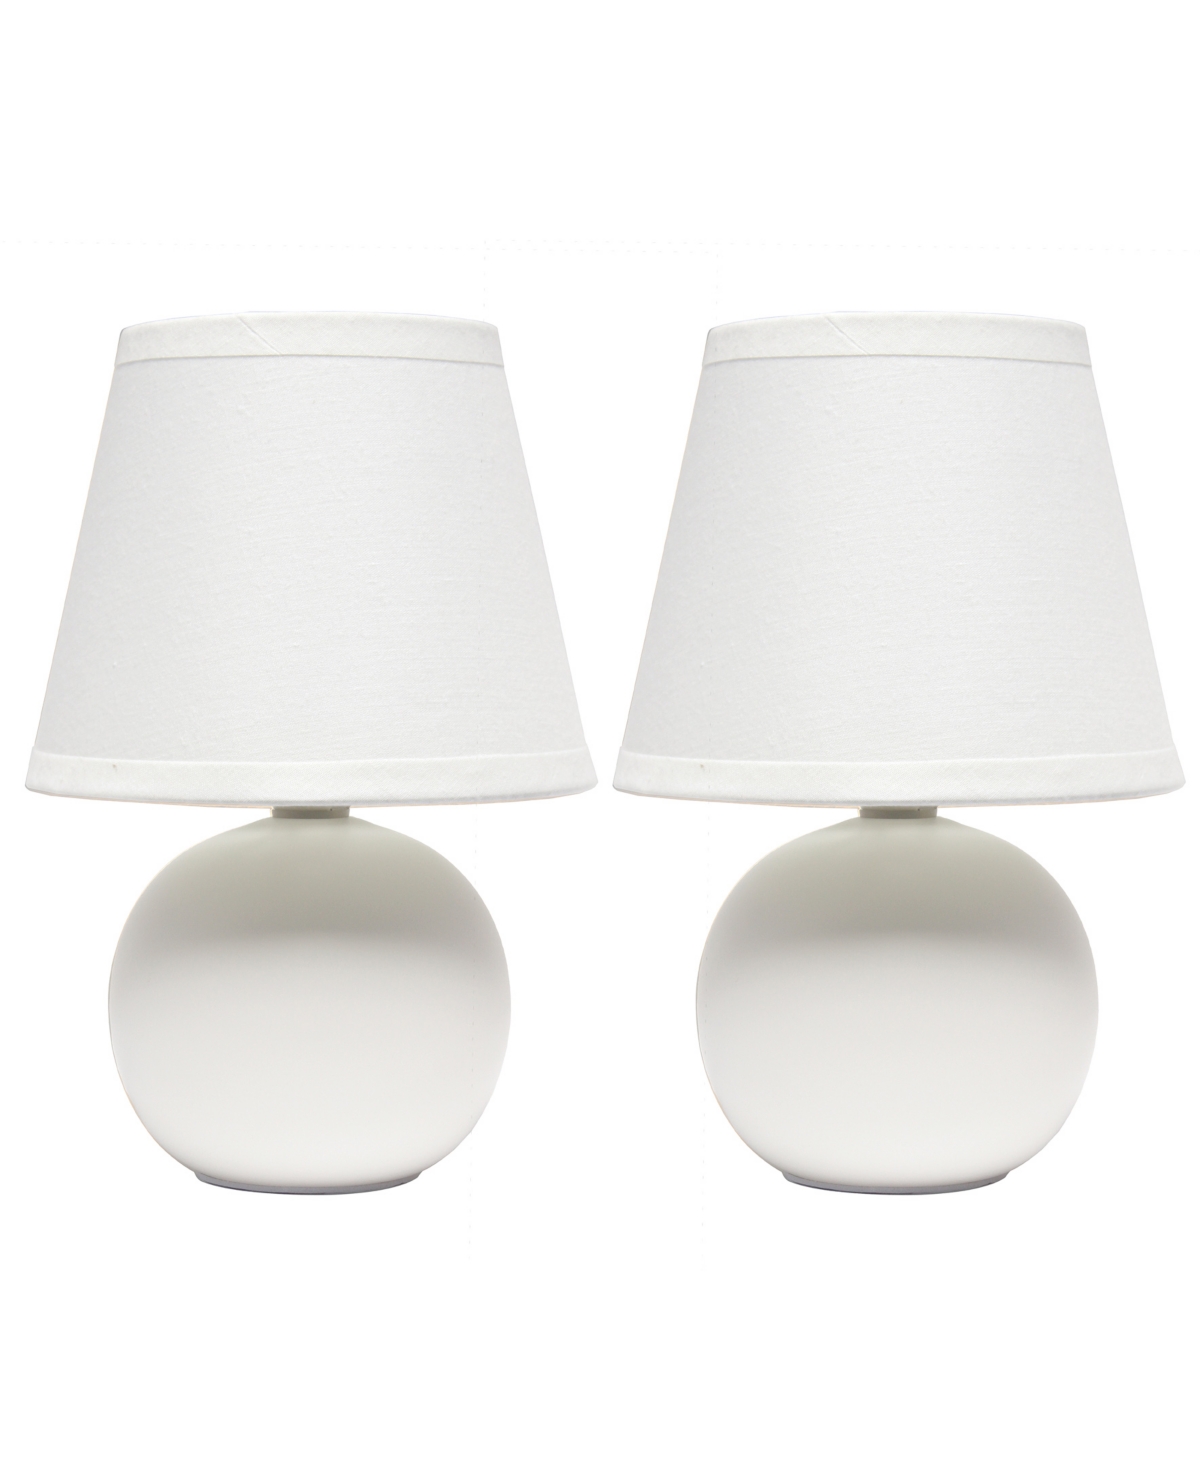 Shop Creekwood Home Nauru 8.66" Traditional Petite Ceramic Orb Bedside Table Desk Lamp Two Pack Set, Tapered Drum Fabric In Off White